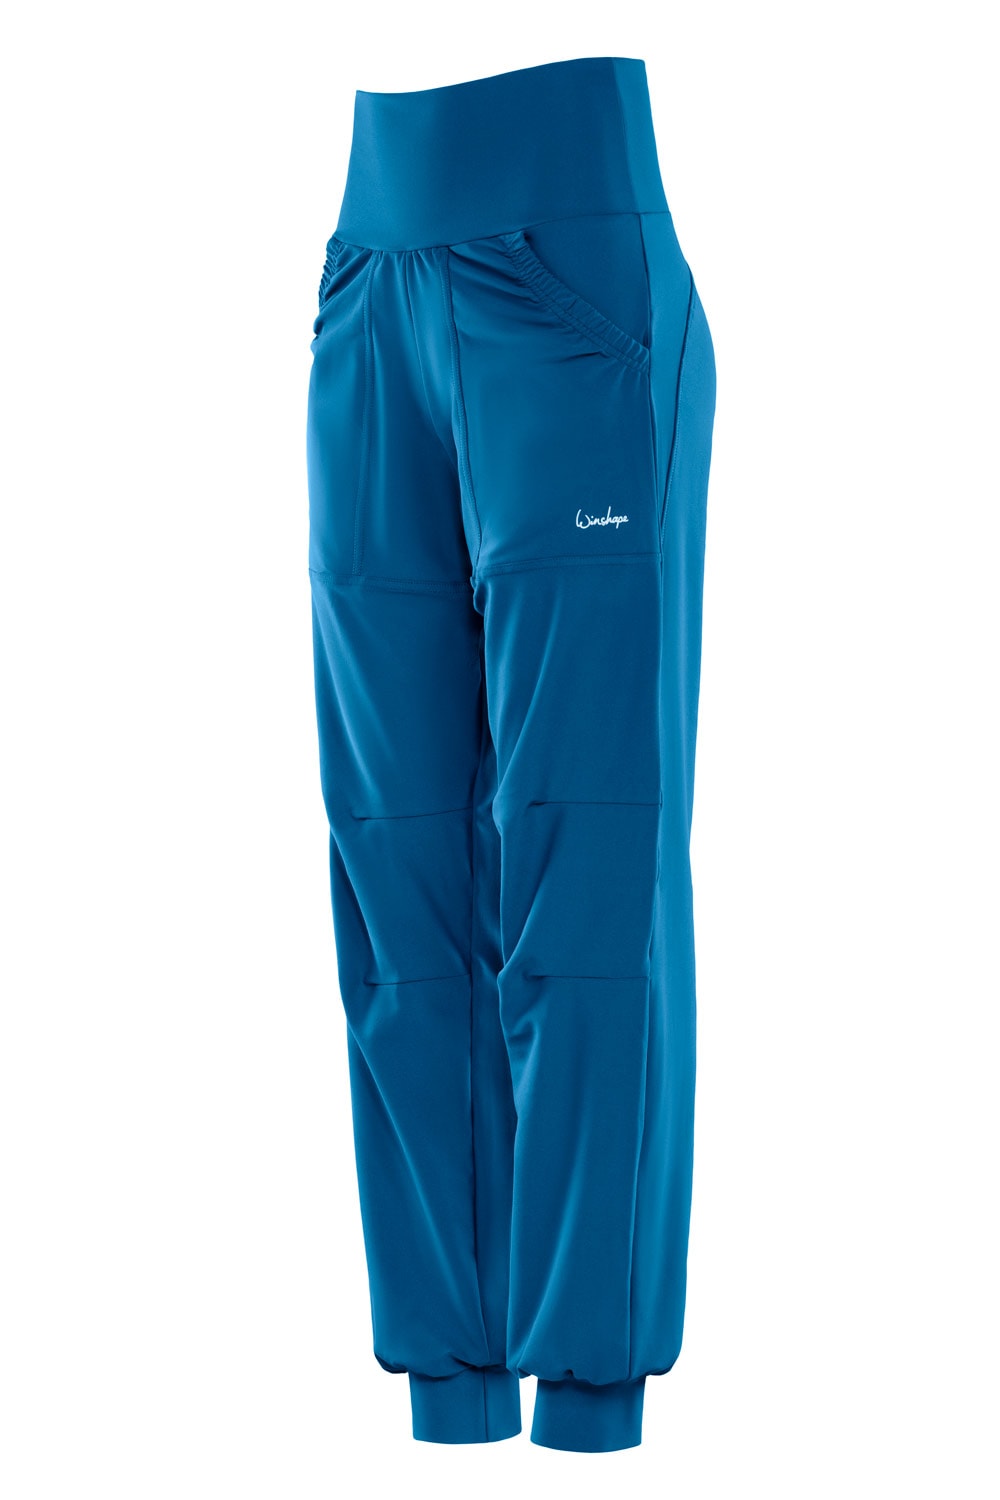 Winshape Sporthose »Functional Comfort Leisure Time Trousers LEI101C«, High  Waist online bei OTTO